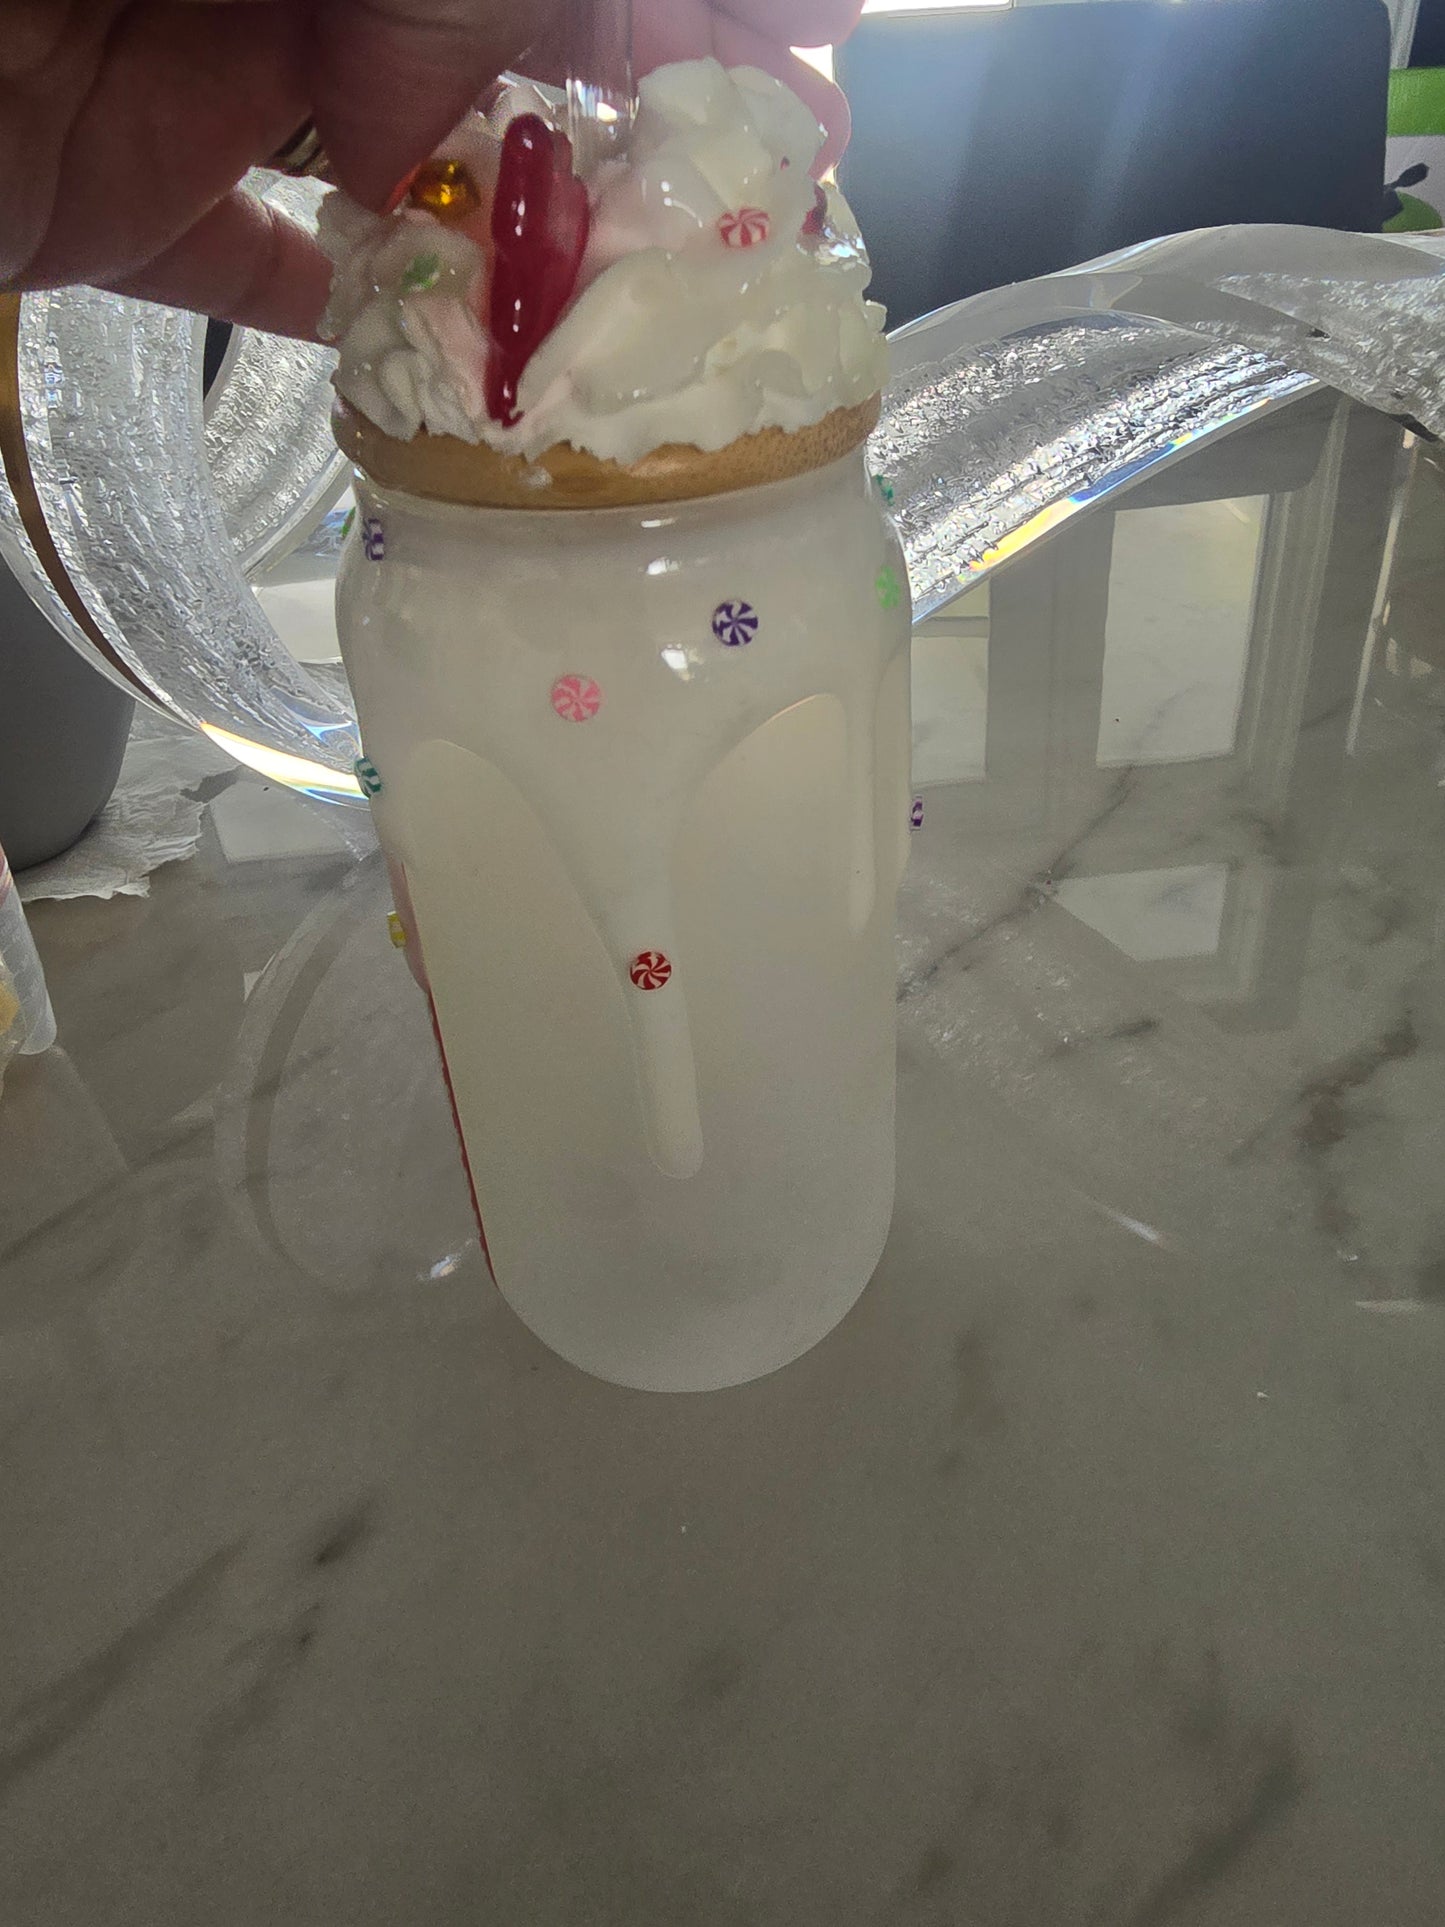 Candy cane glass tumbler